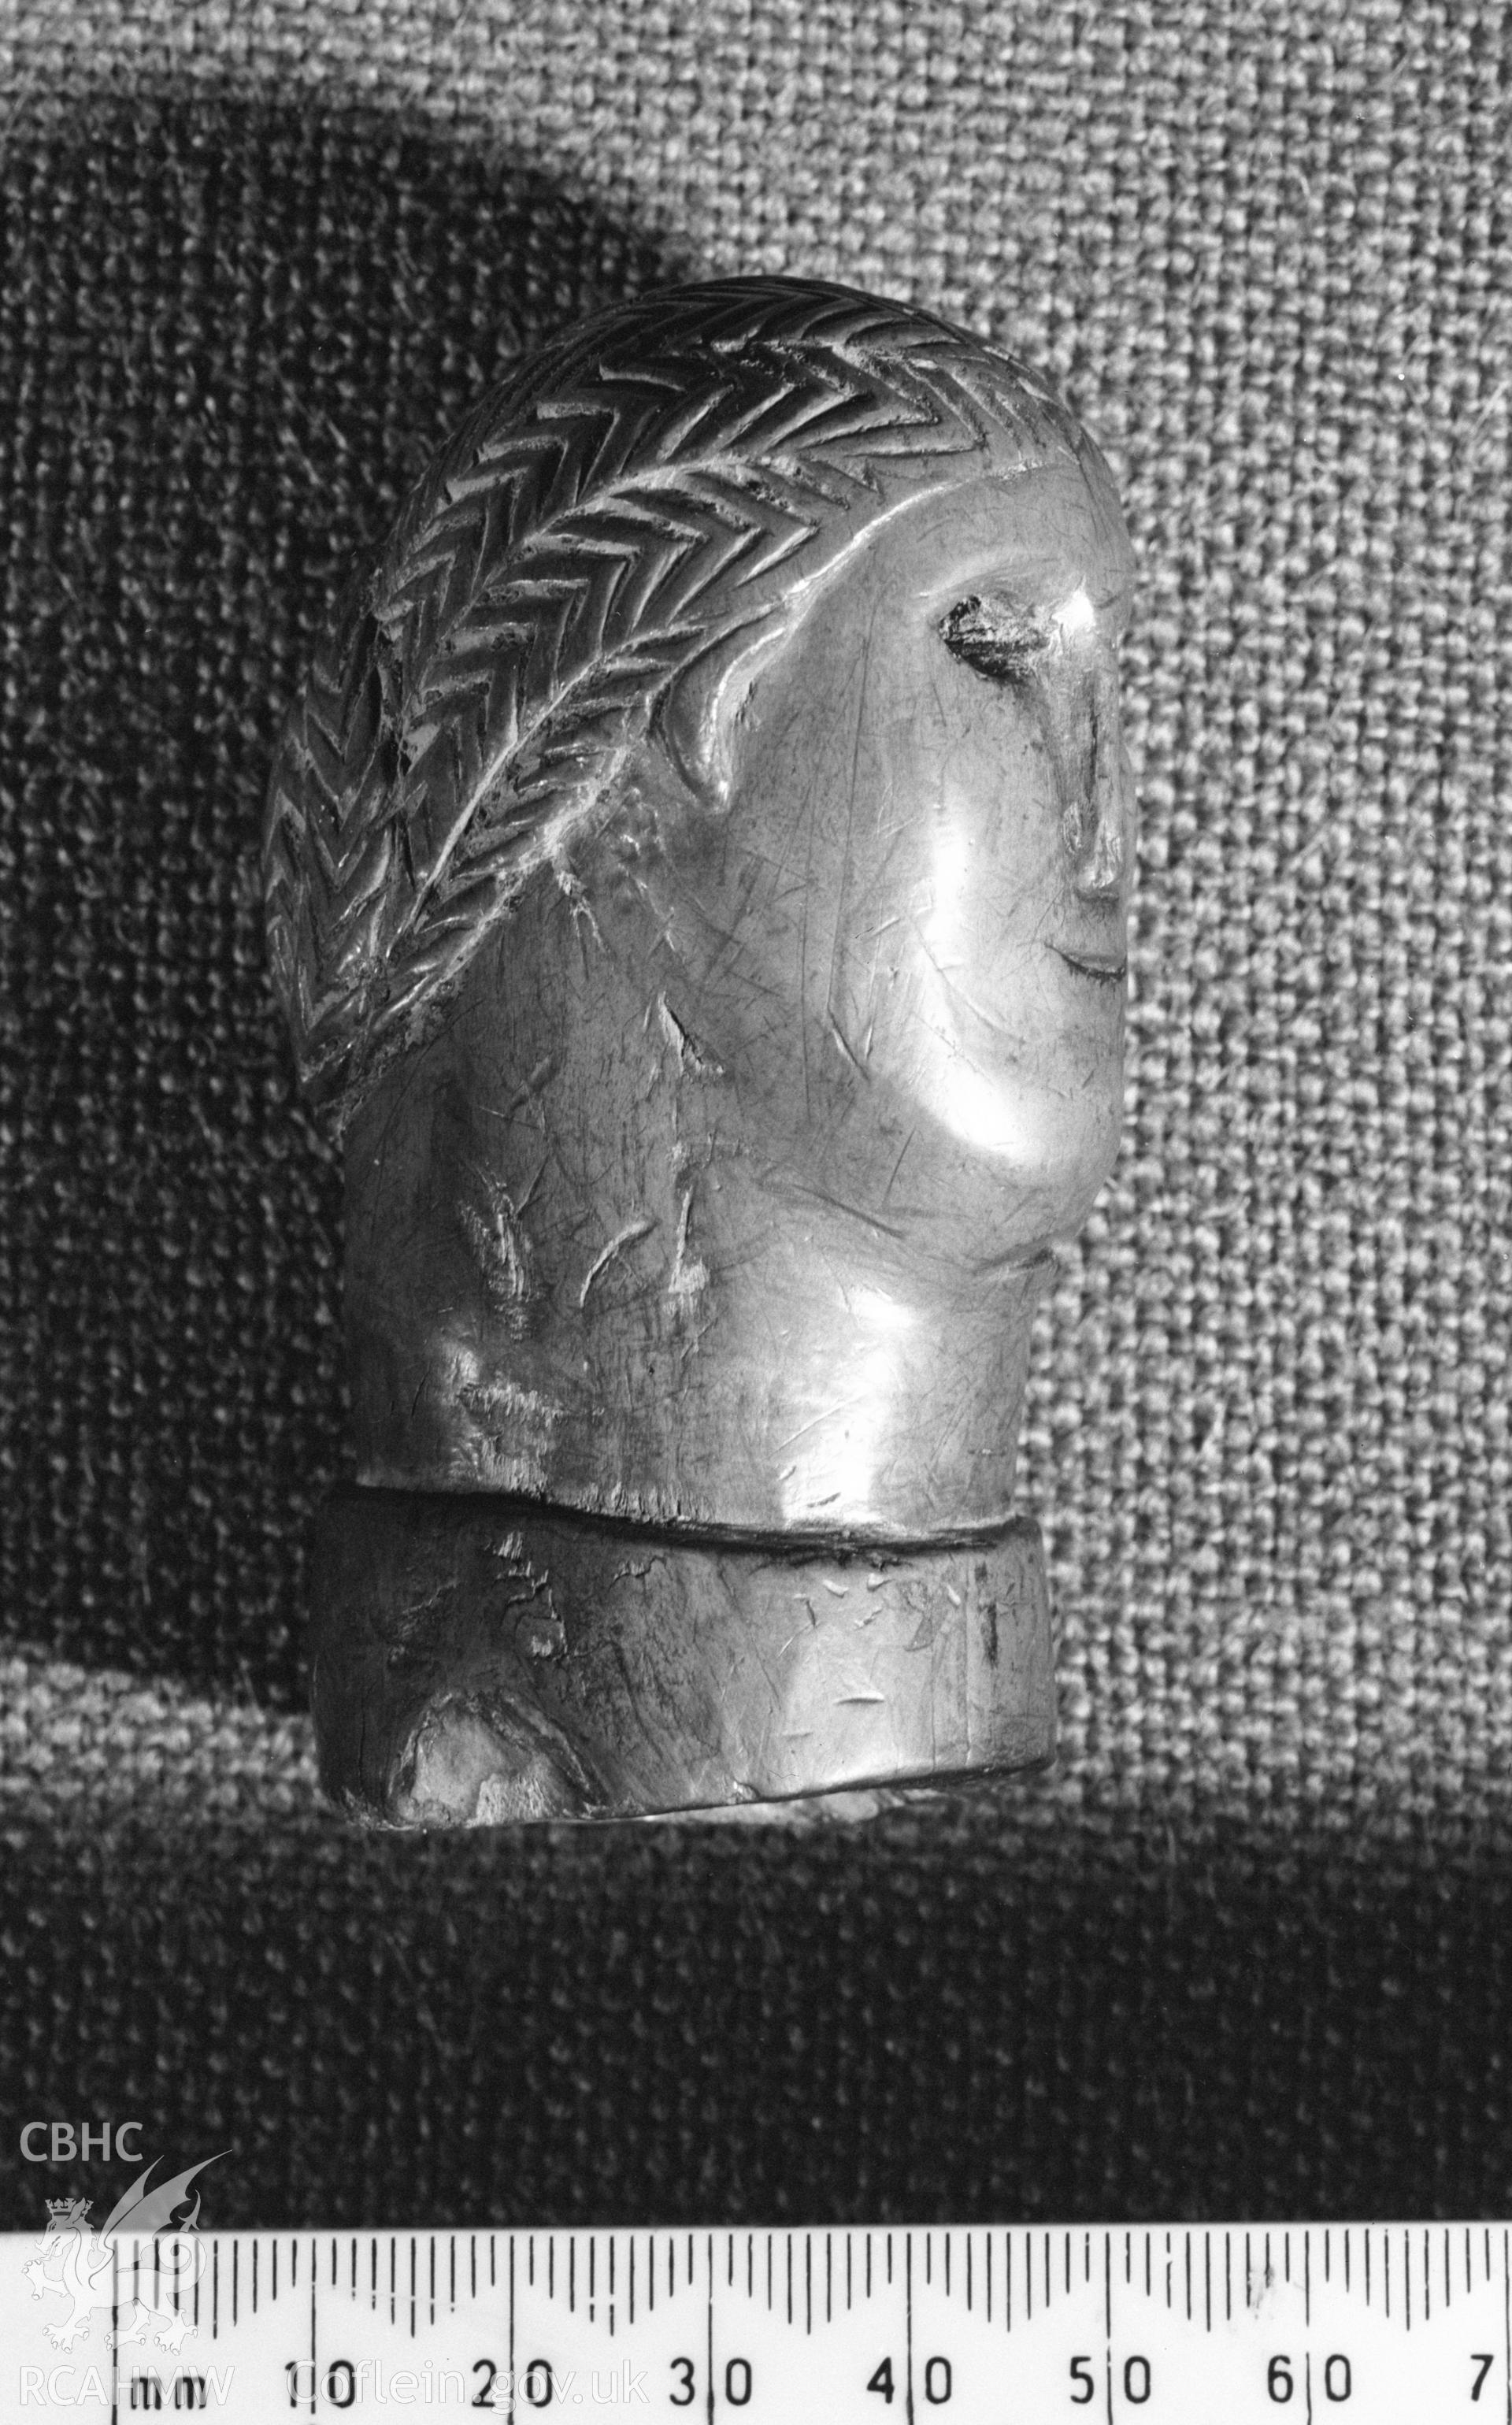 Digital copy of a black and white negative showing carved wooden head from Llanio Roman Fort.